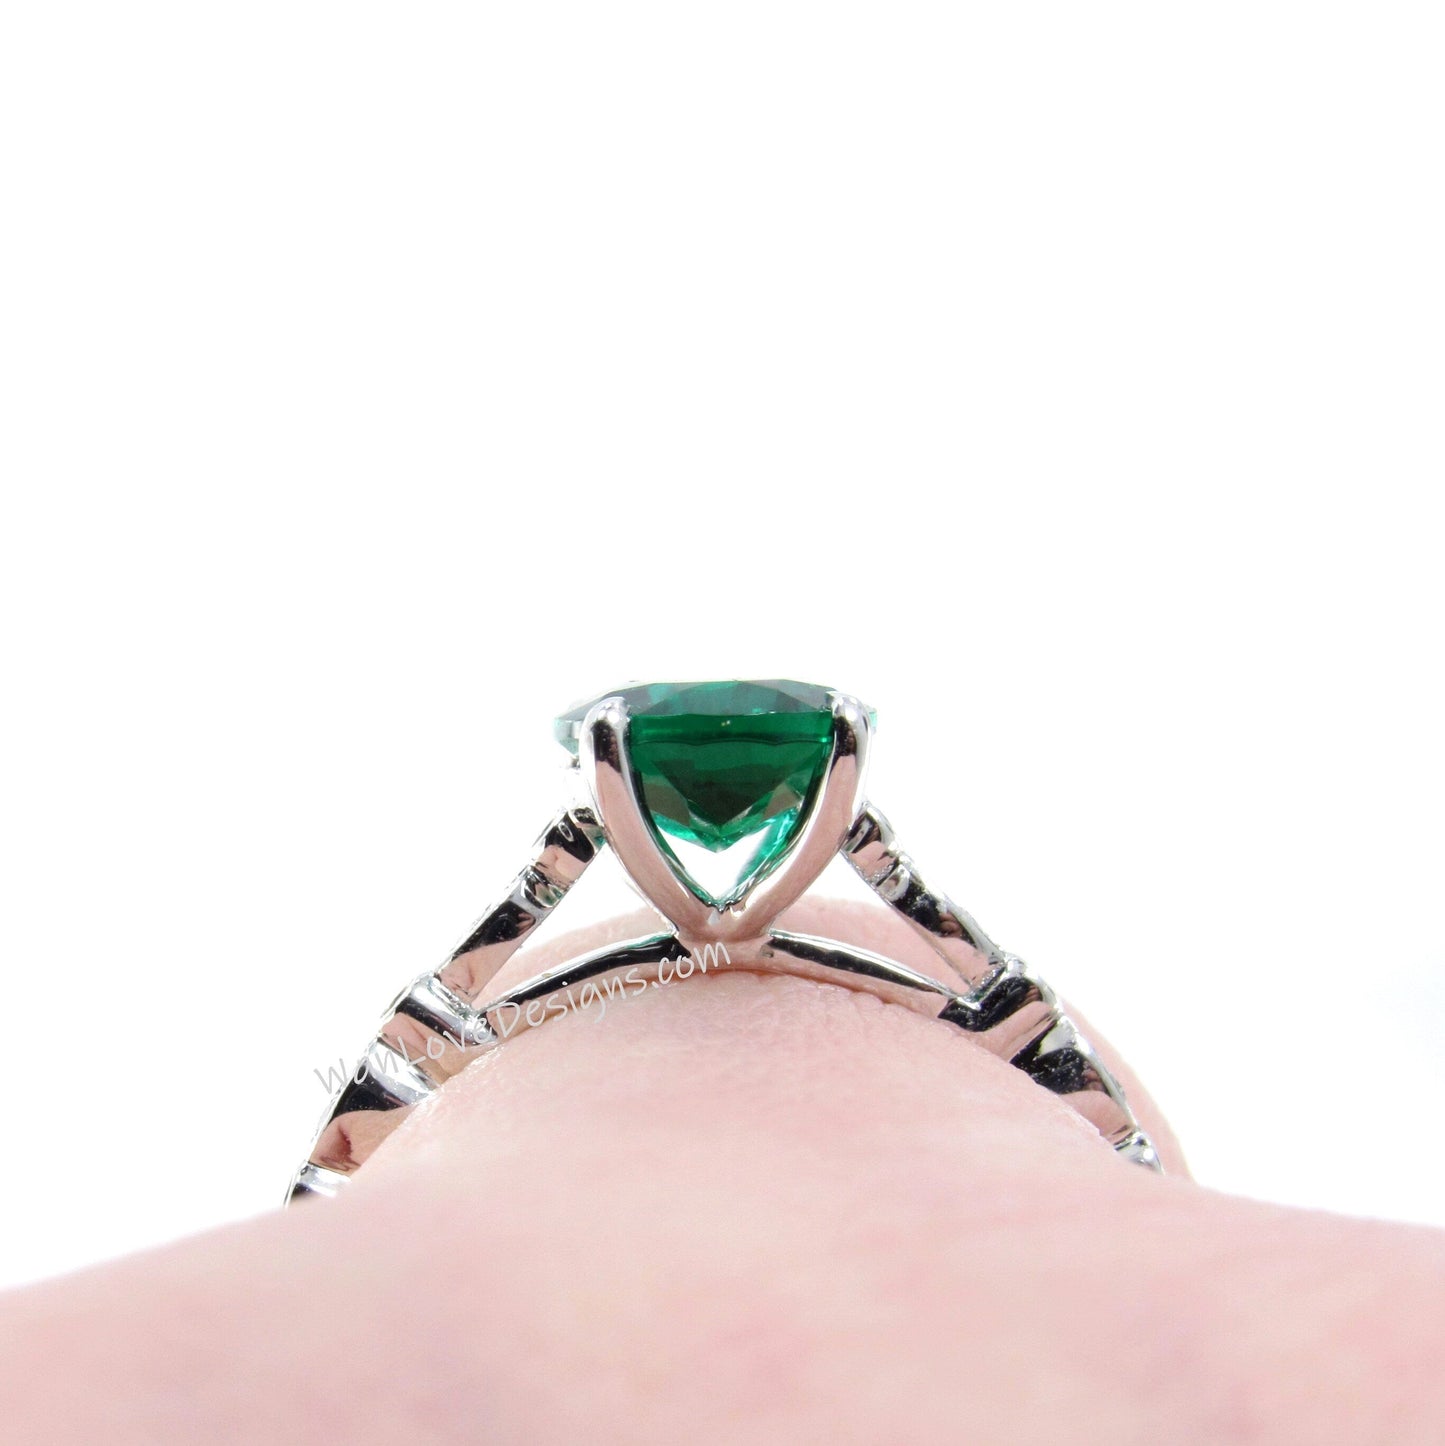 3ct Vintage Oval Emerald Diamonds Scalloped Art Deco Solitaire Engagement Ring, 18k White Gold Ring, Ready to Ship Ring Wan Love Designs